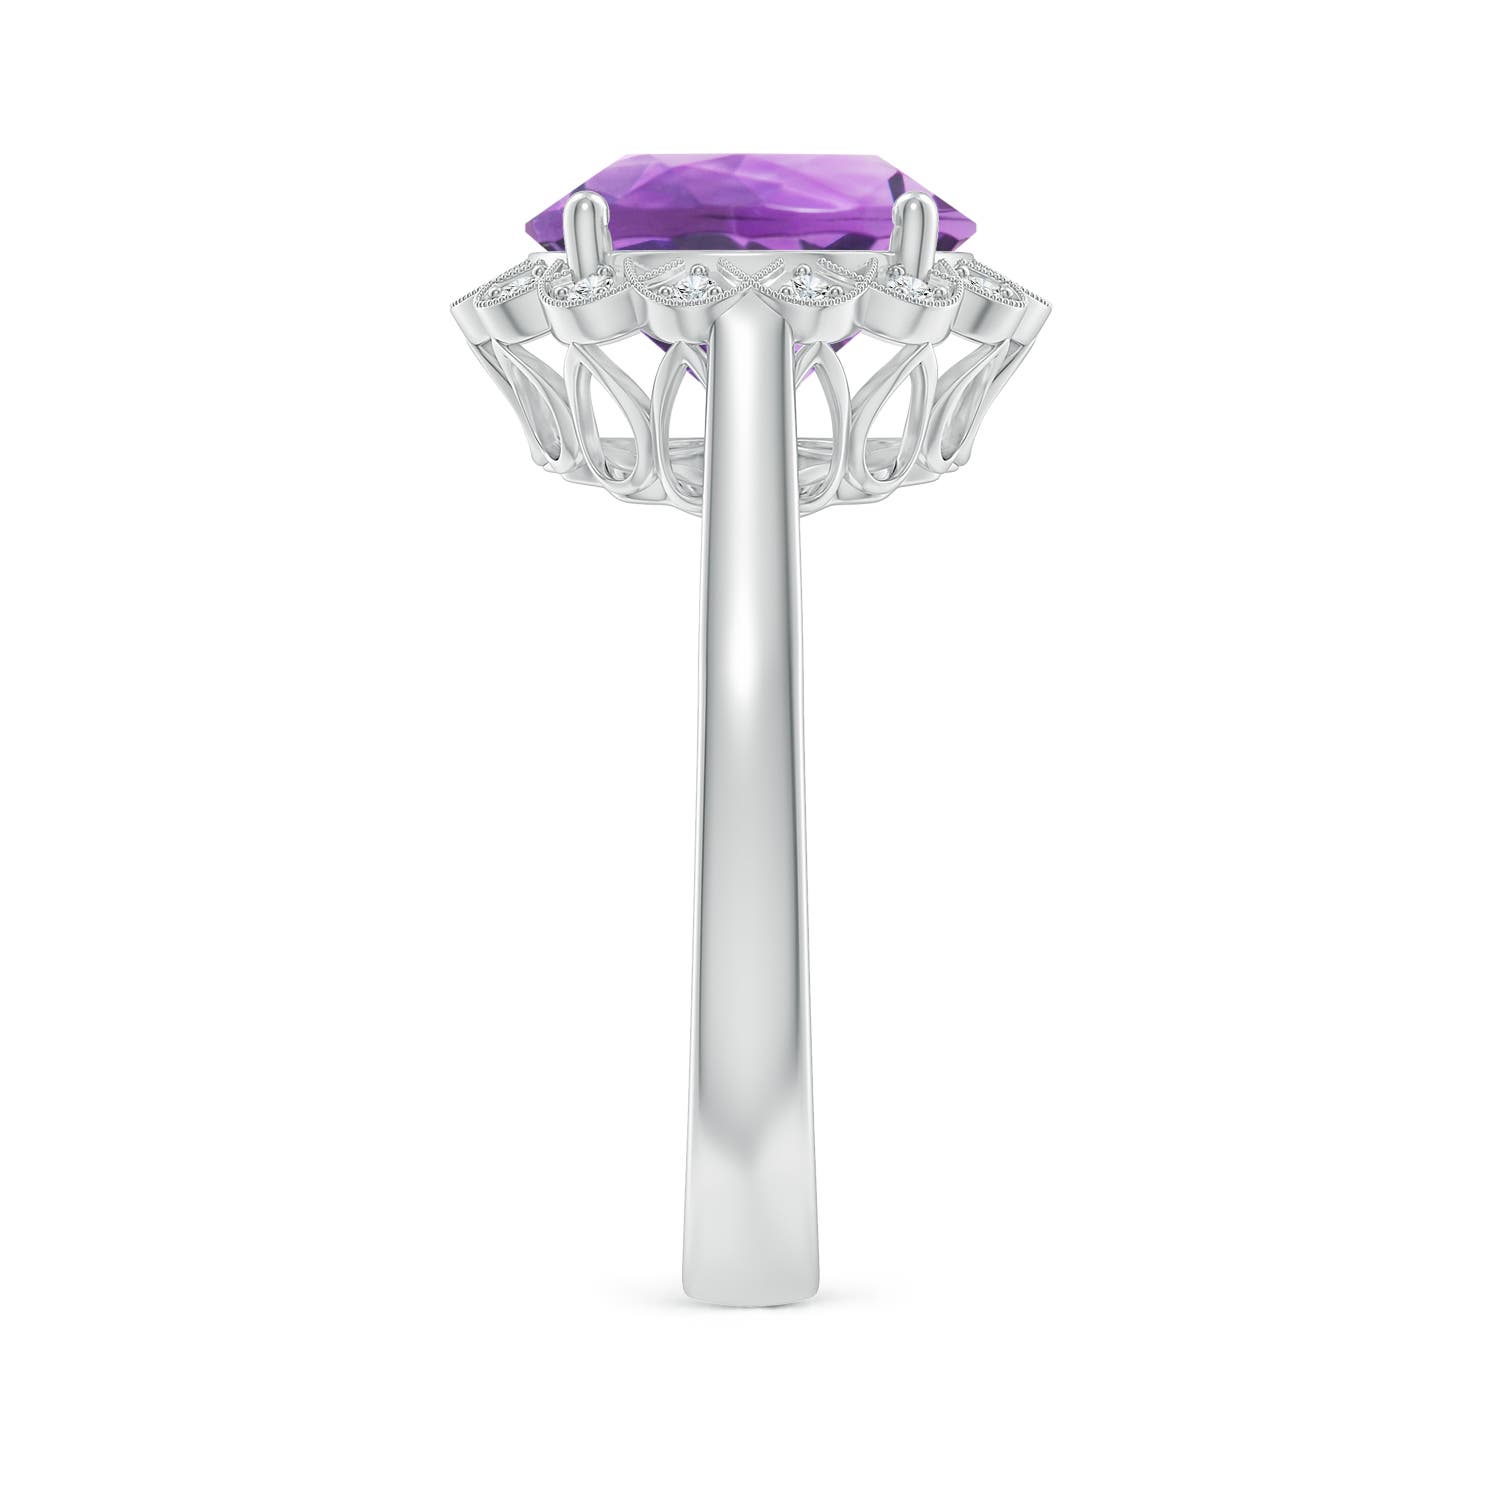 A- Amethyst / 3.28 CT / 14 KT White Gold